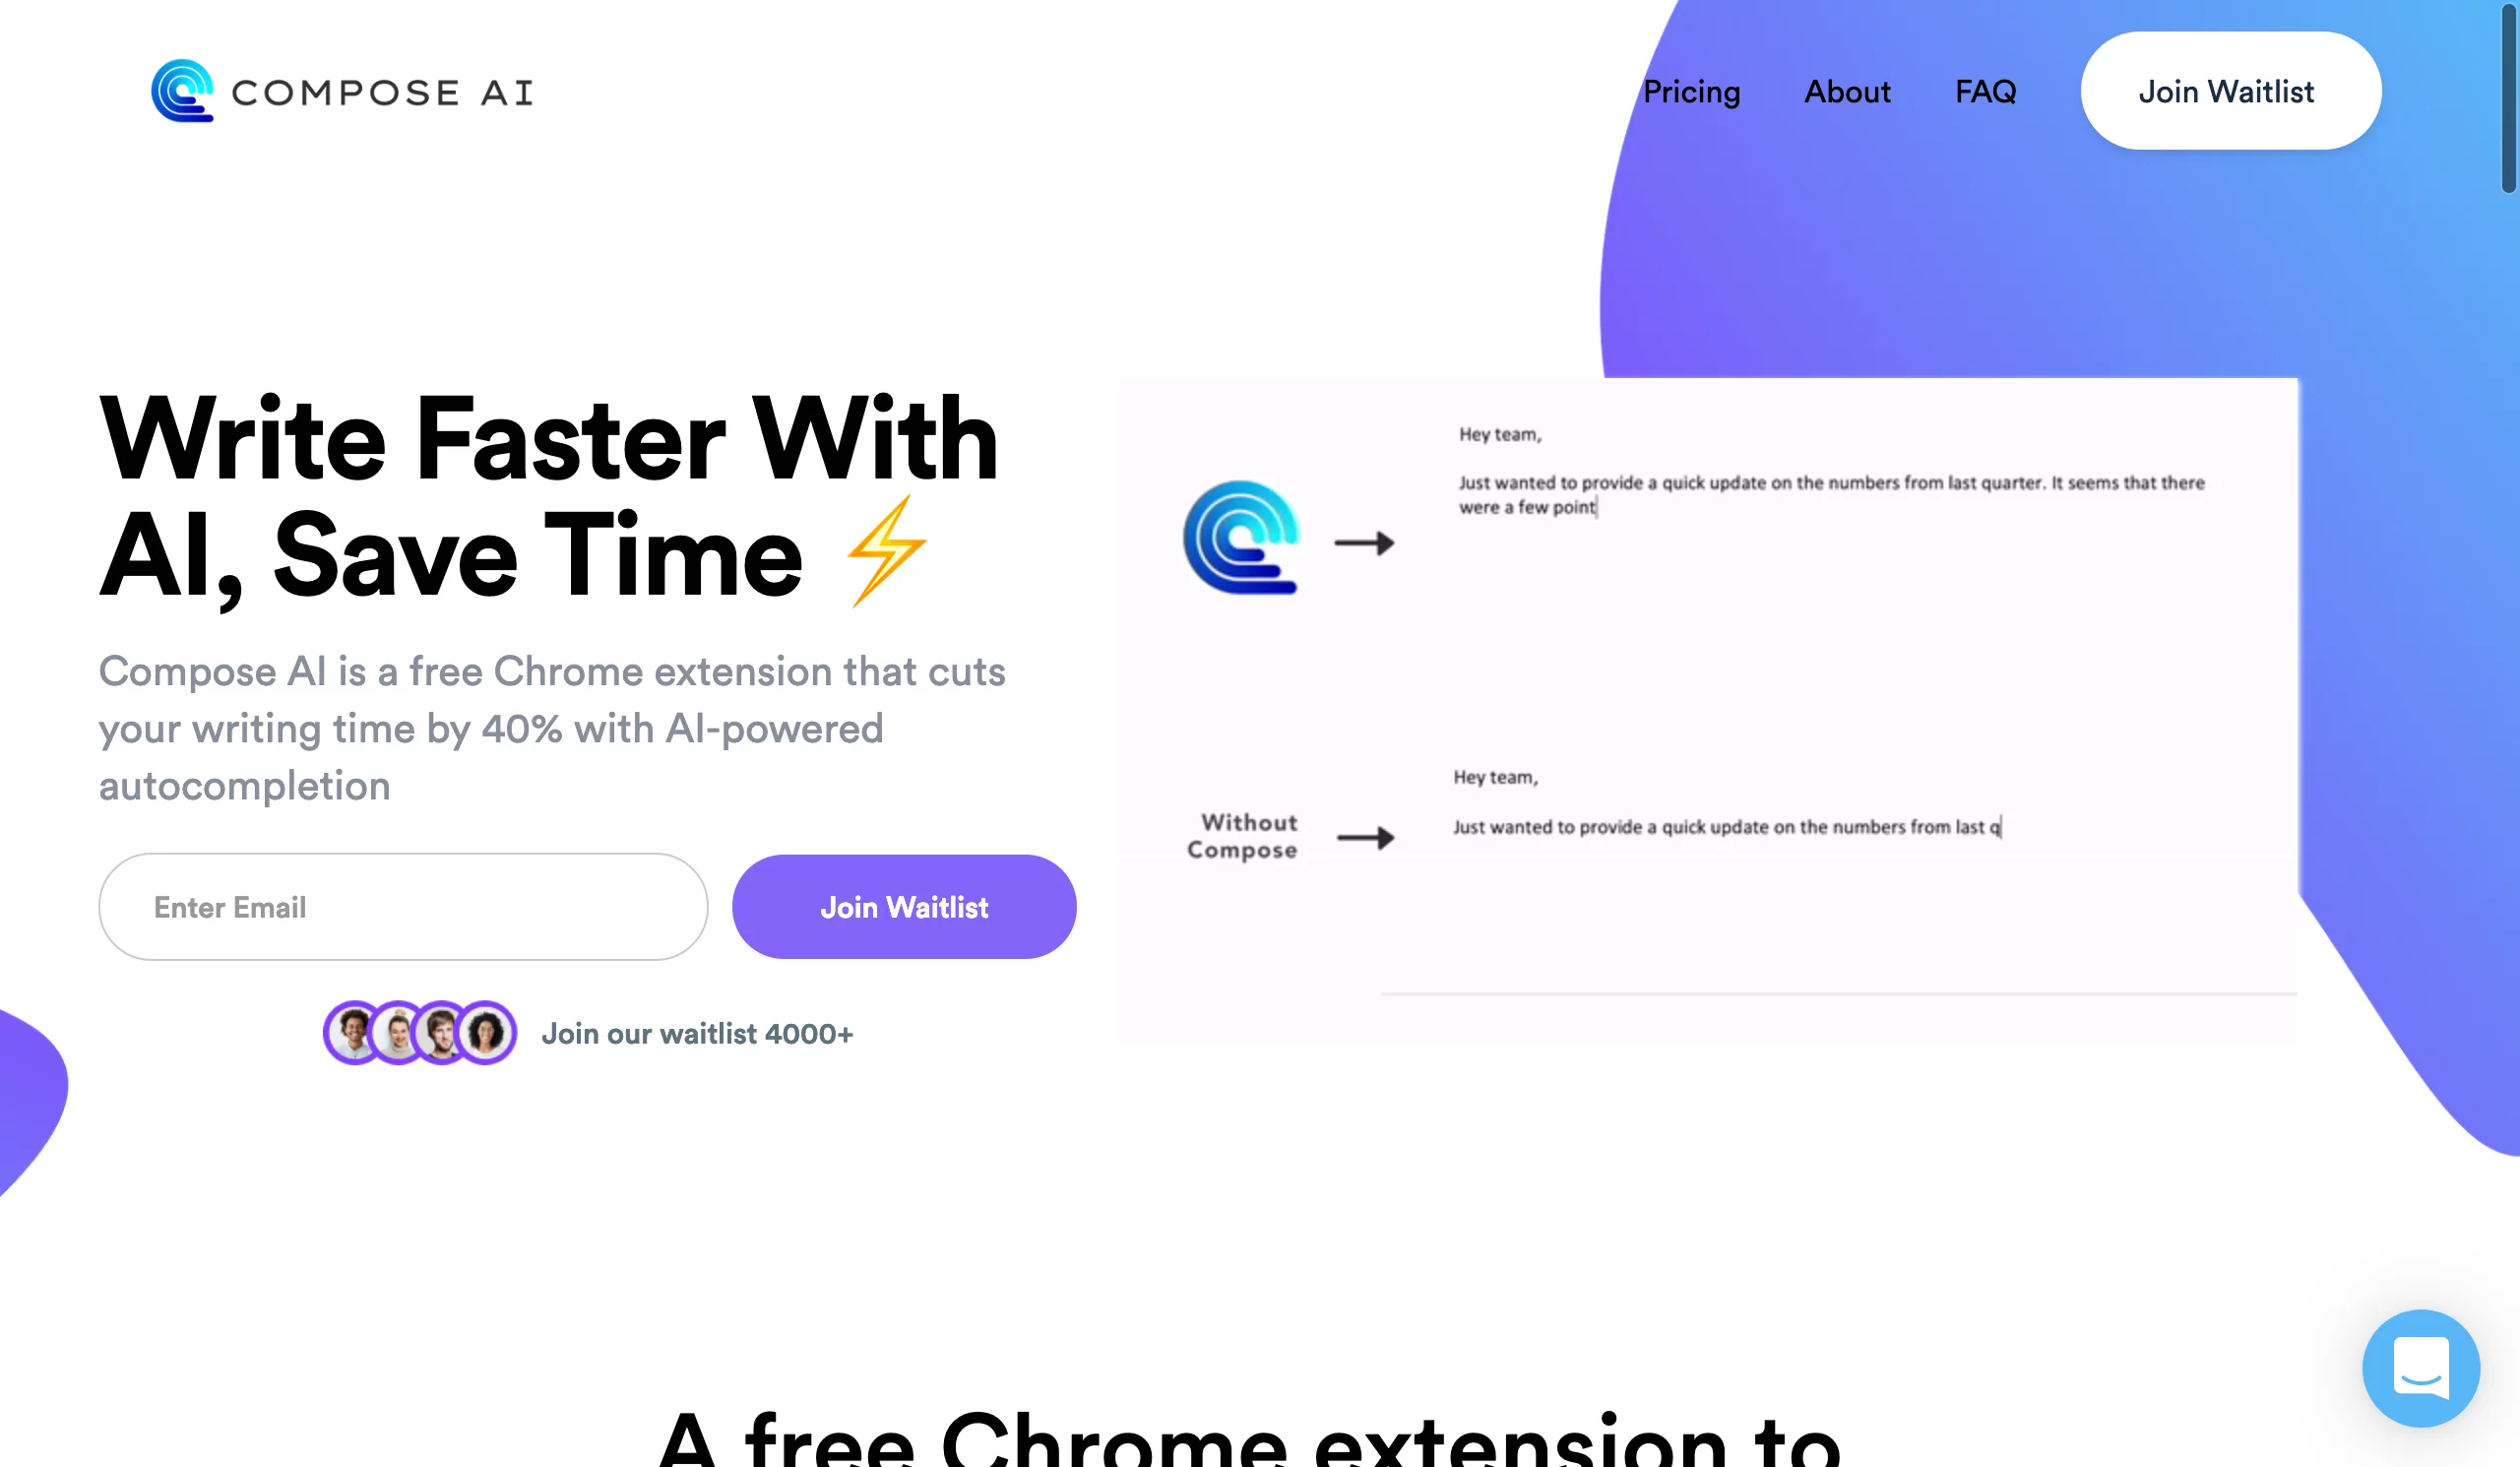  Cut your writing time by 40% with AI-powered